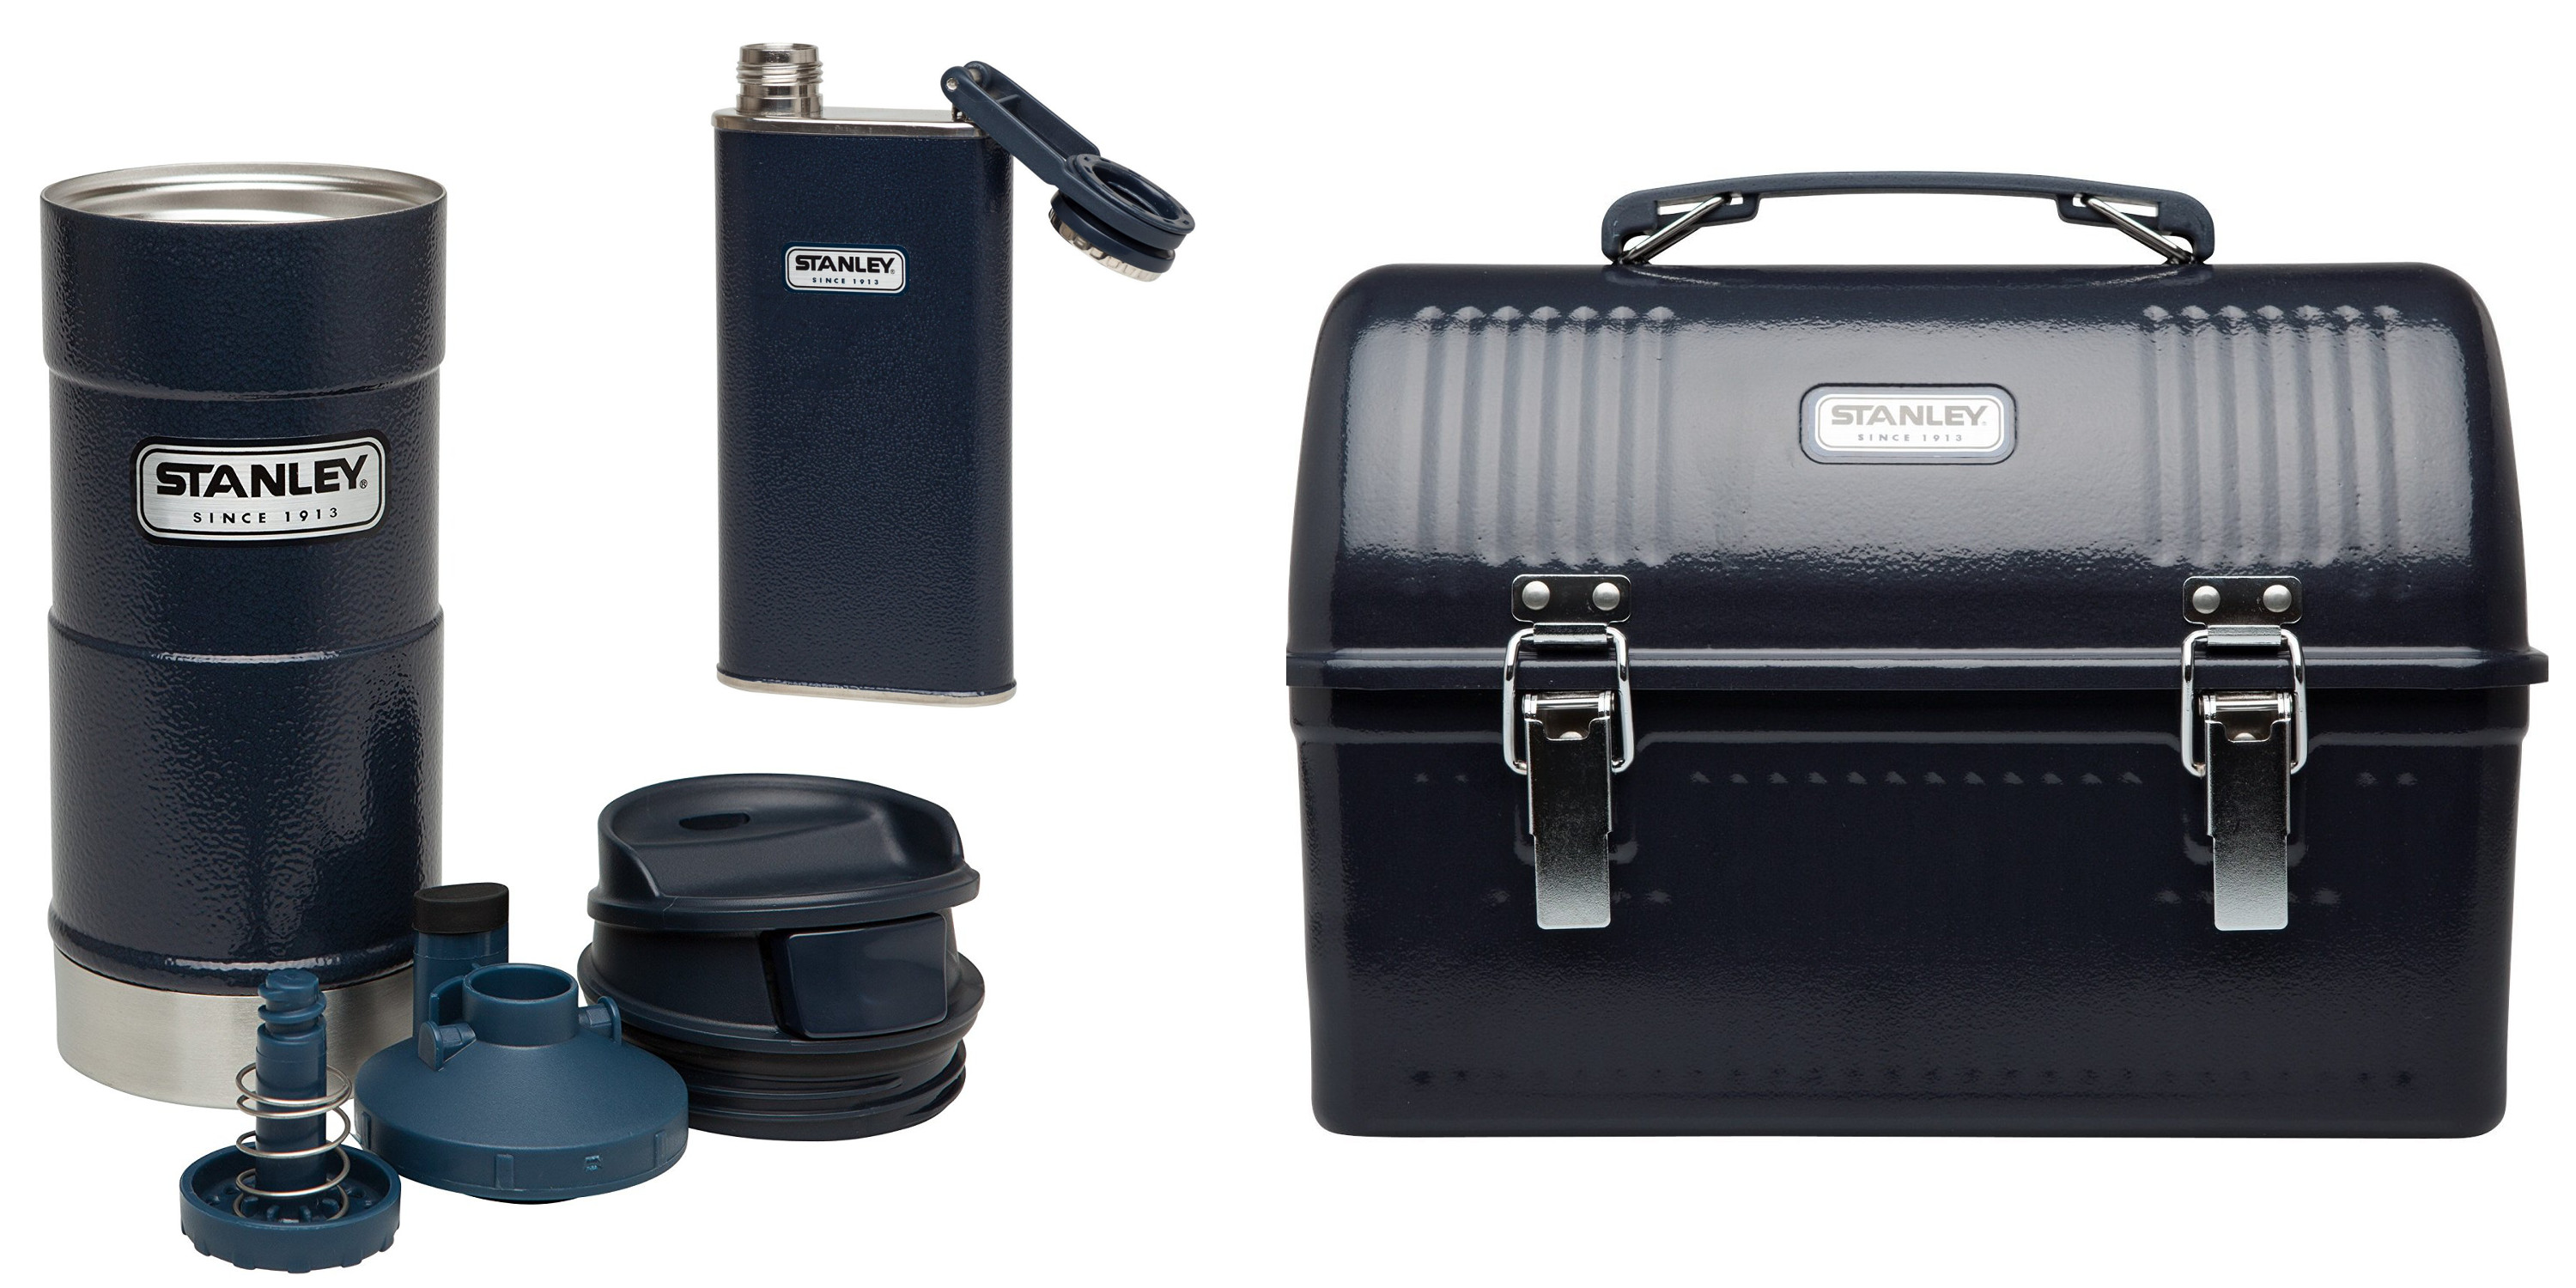 Stanley - Always timeless, durable and classic, our Lunch Box just